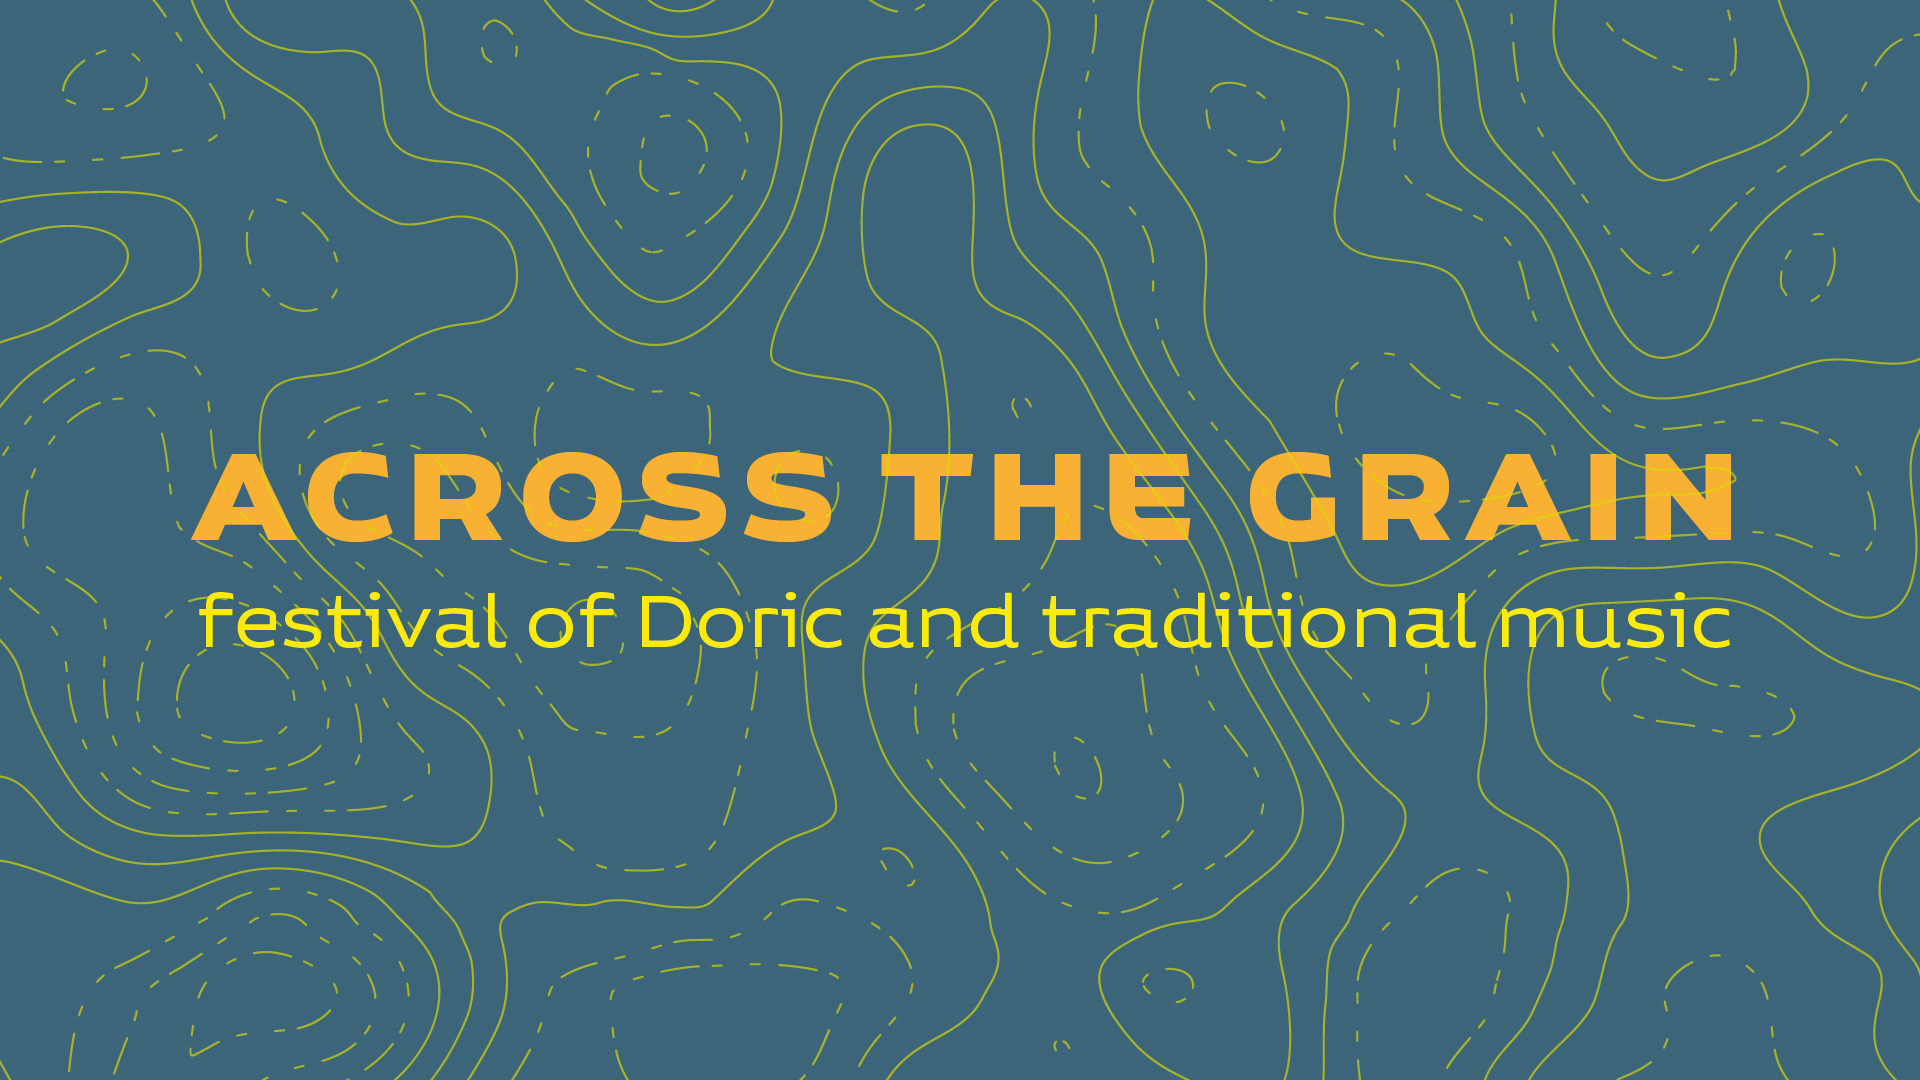 'Across the Grain logo with wording - festival of Doric and traditional music